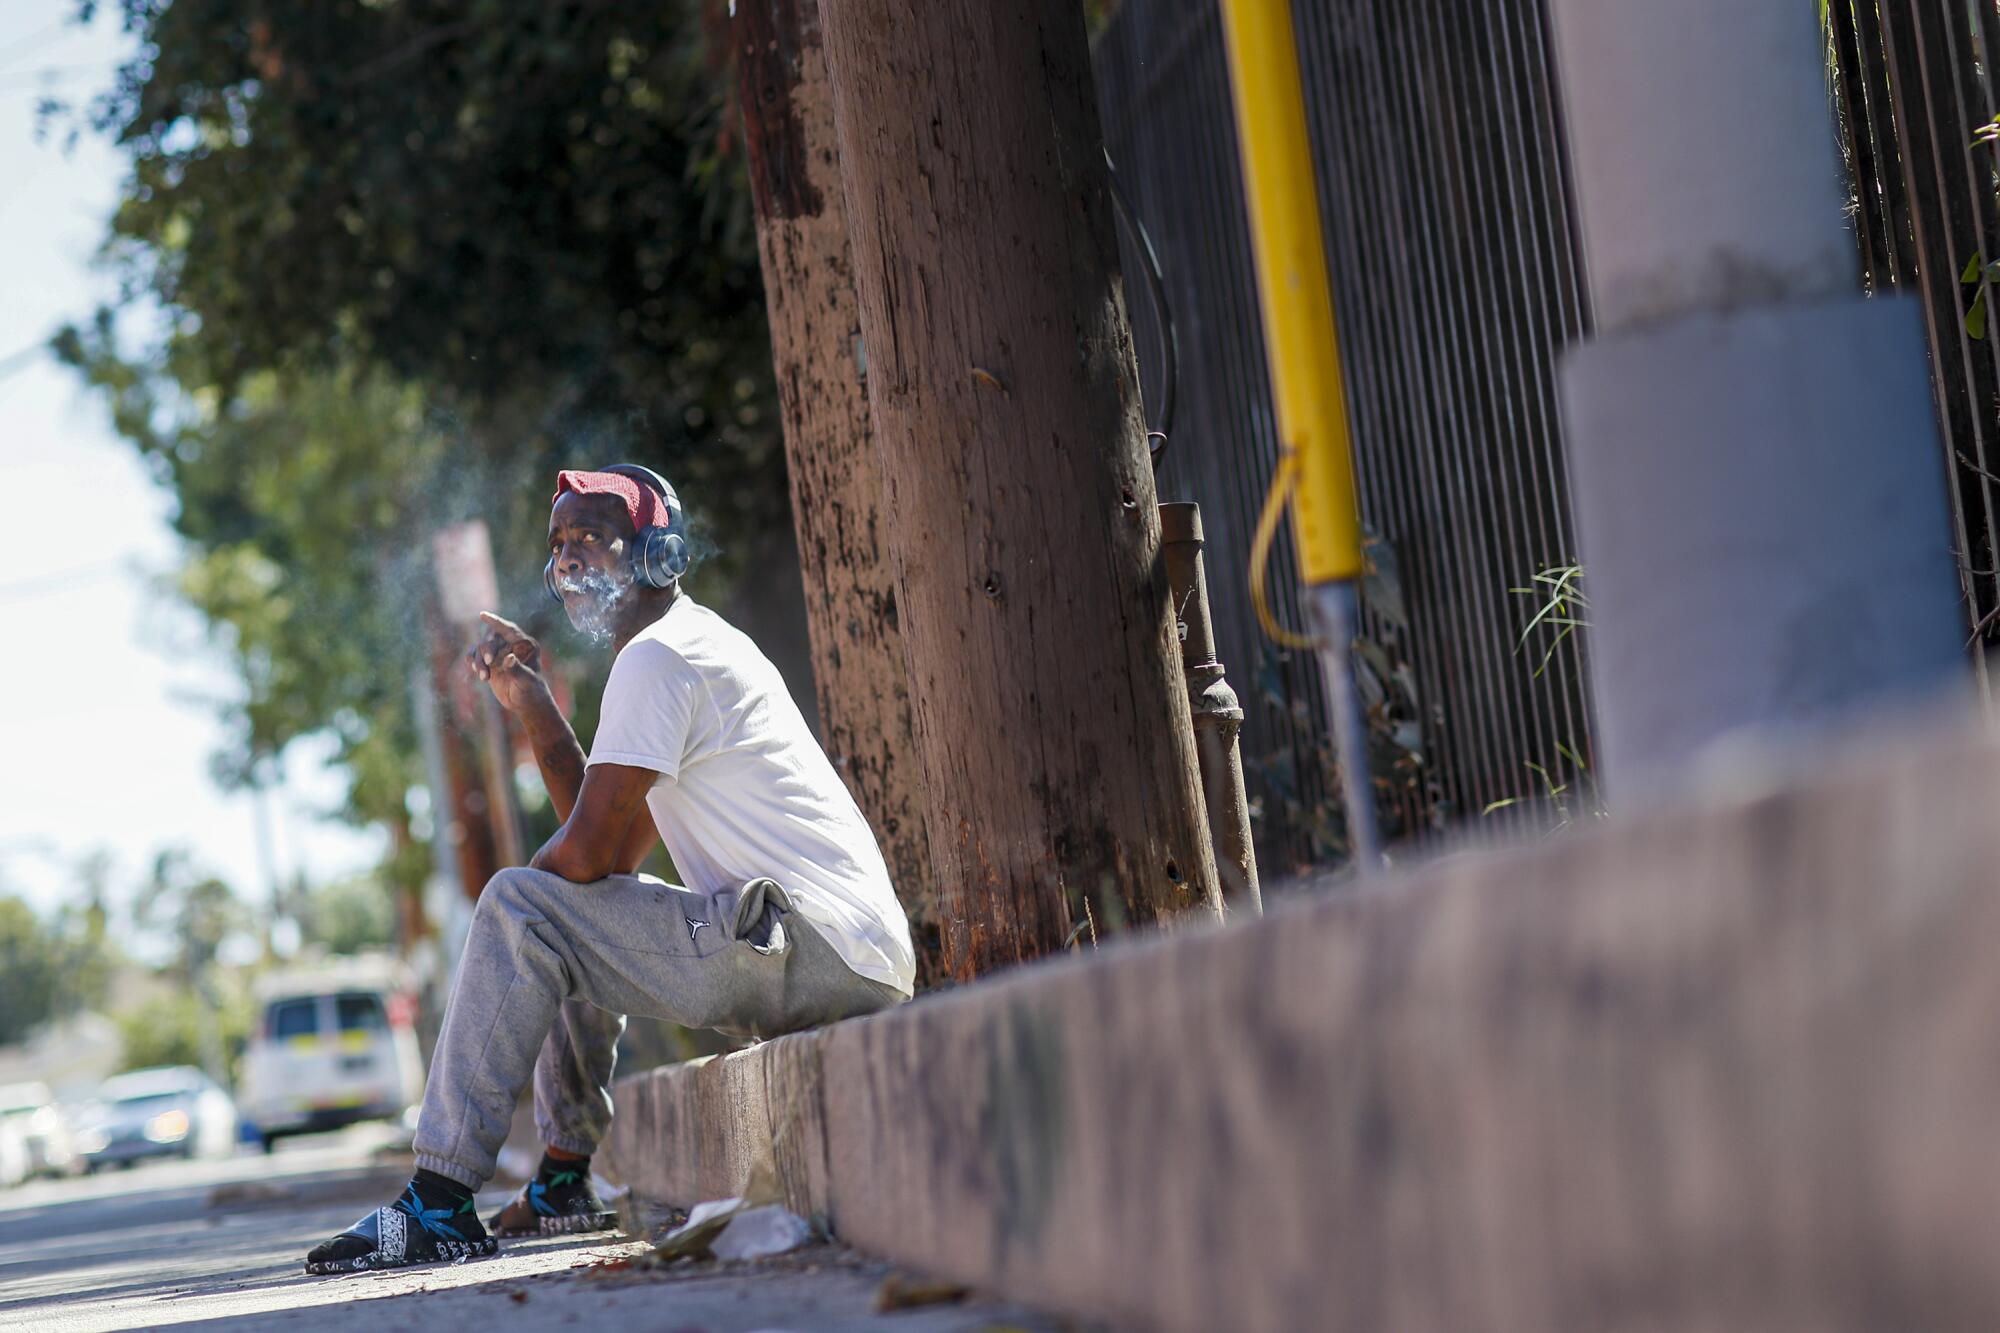 Donald Winston sits alone on a side street minutes after celebrating his birthday at a homeless shelter.